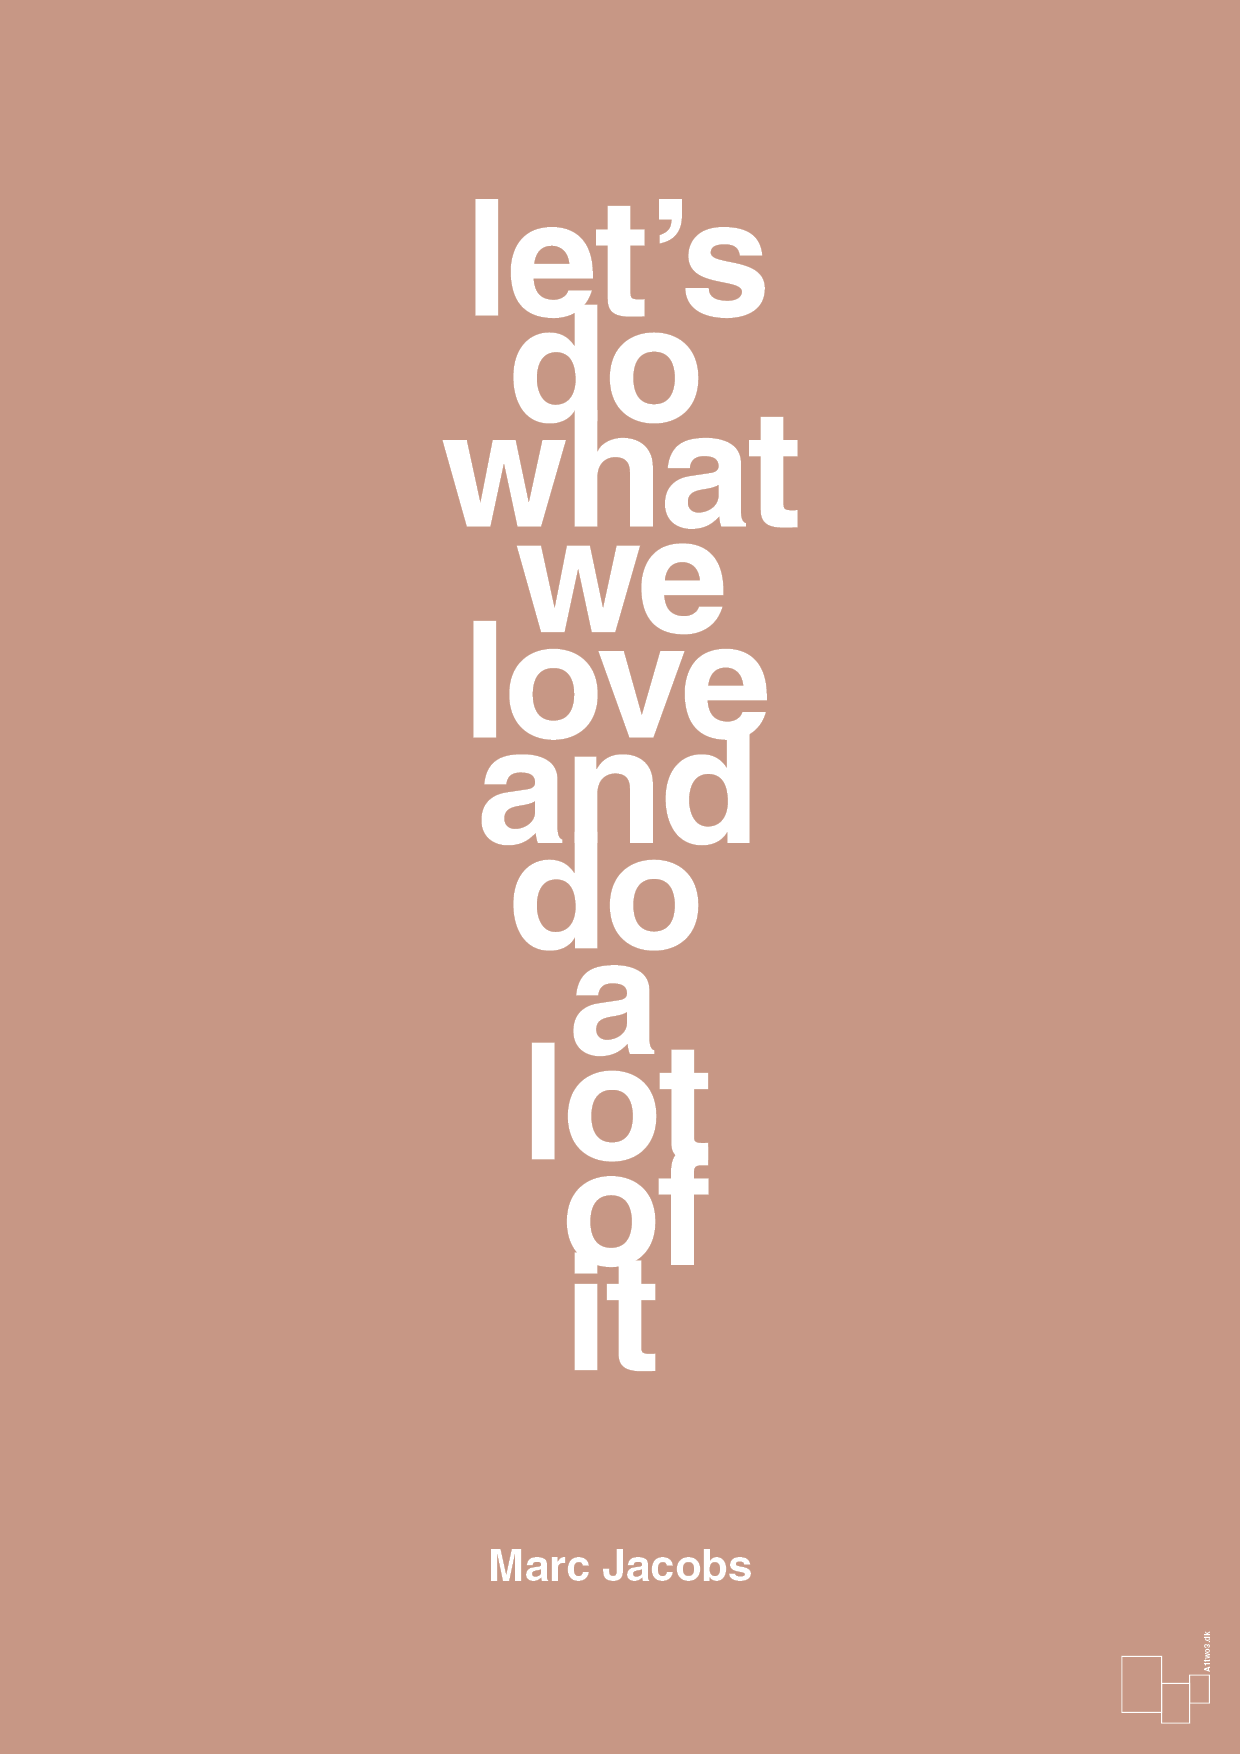 lets do what we love and do a lot of it - Plakat med Citater i Powder